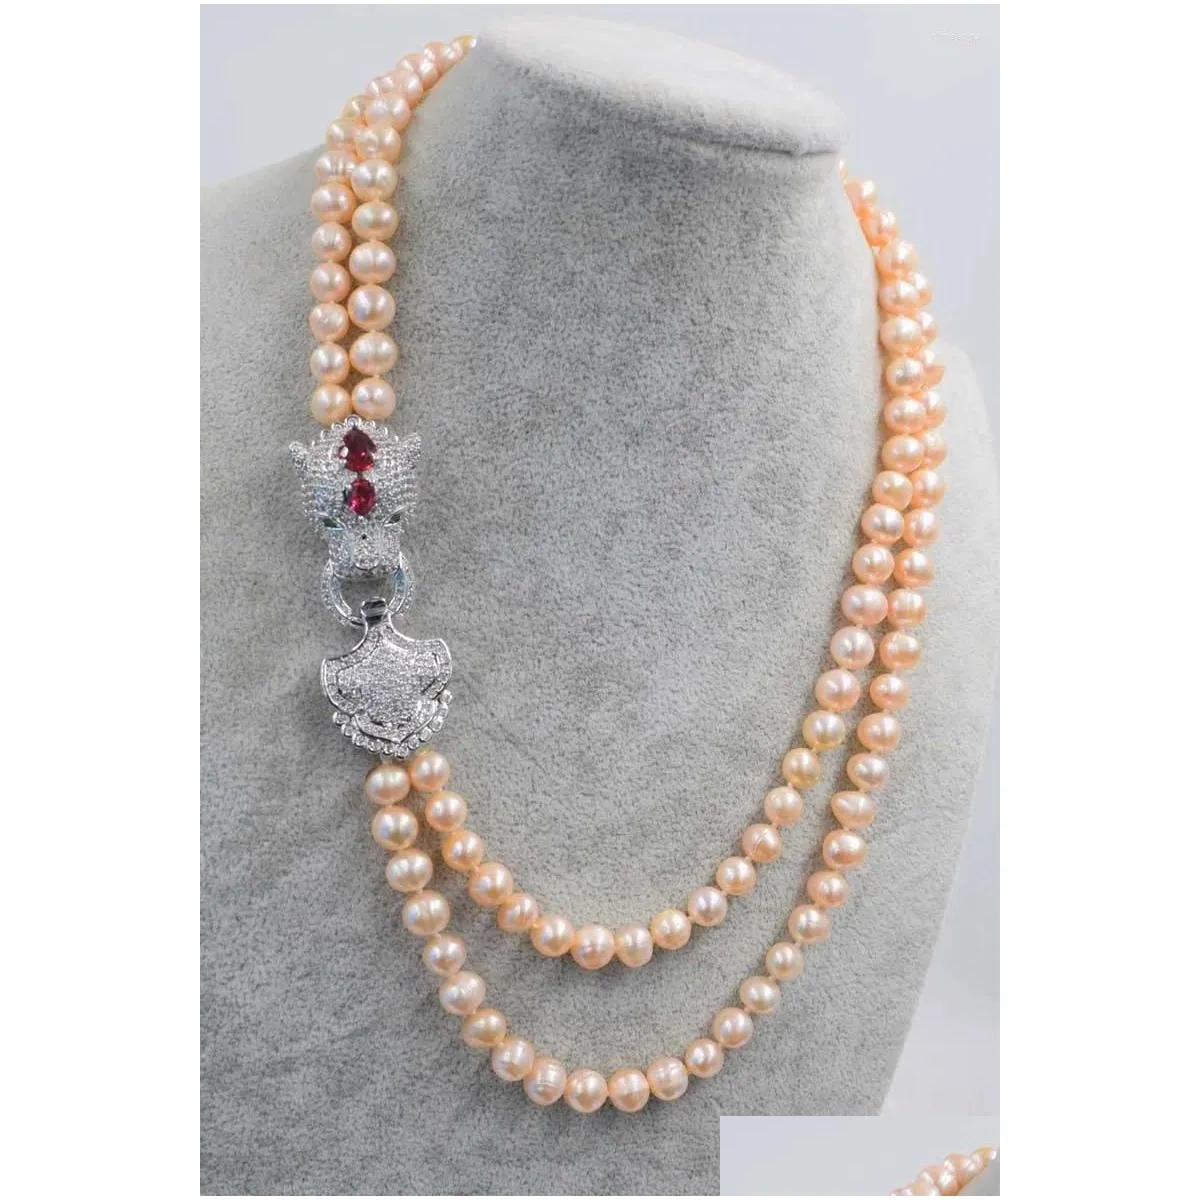 Choker 2rows Freshwater Pearl Pink Near Round 7-8mm Red Leopard Clasp 17-19inch Necklace Wholesale